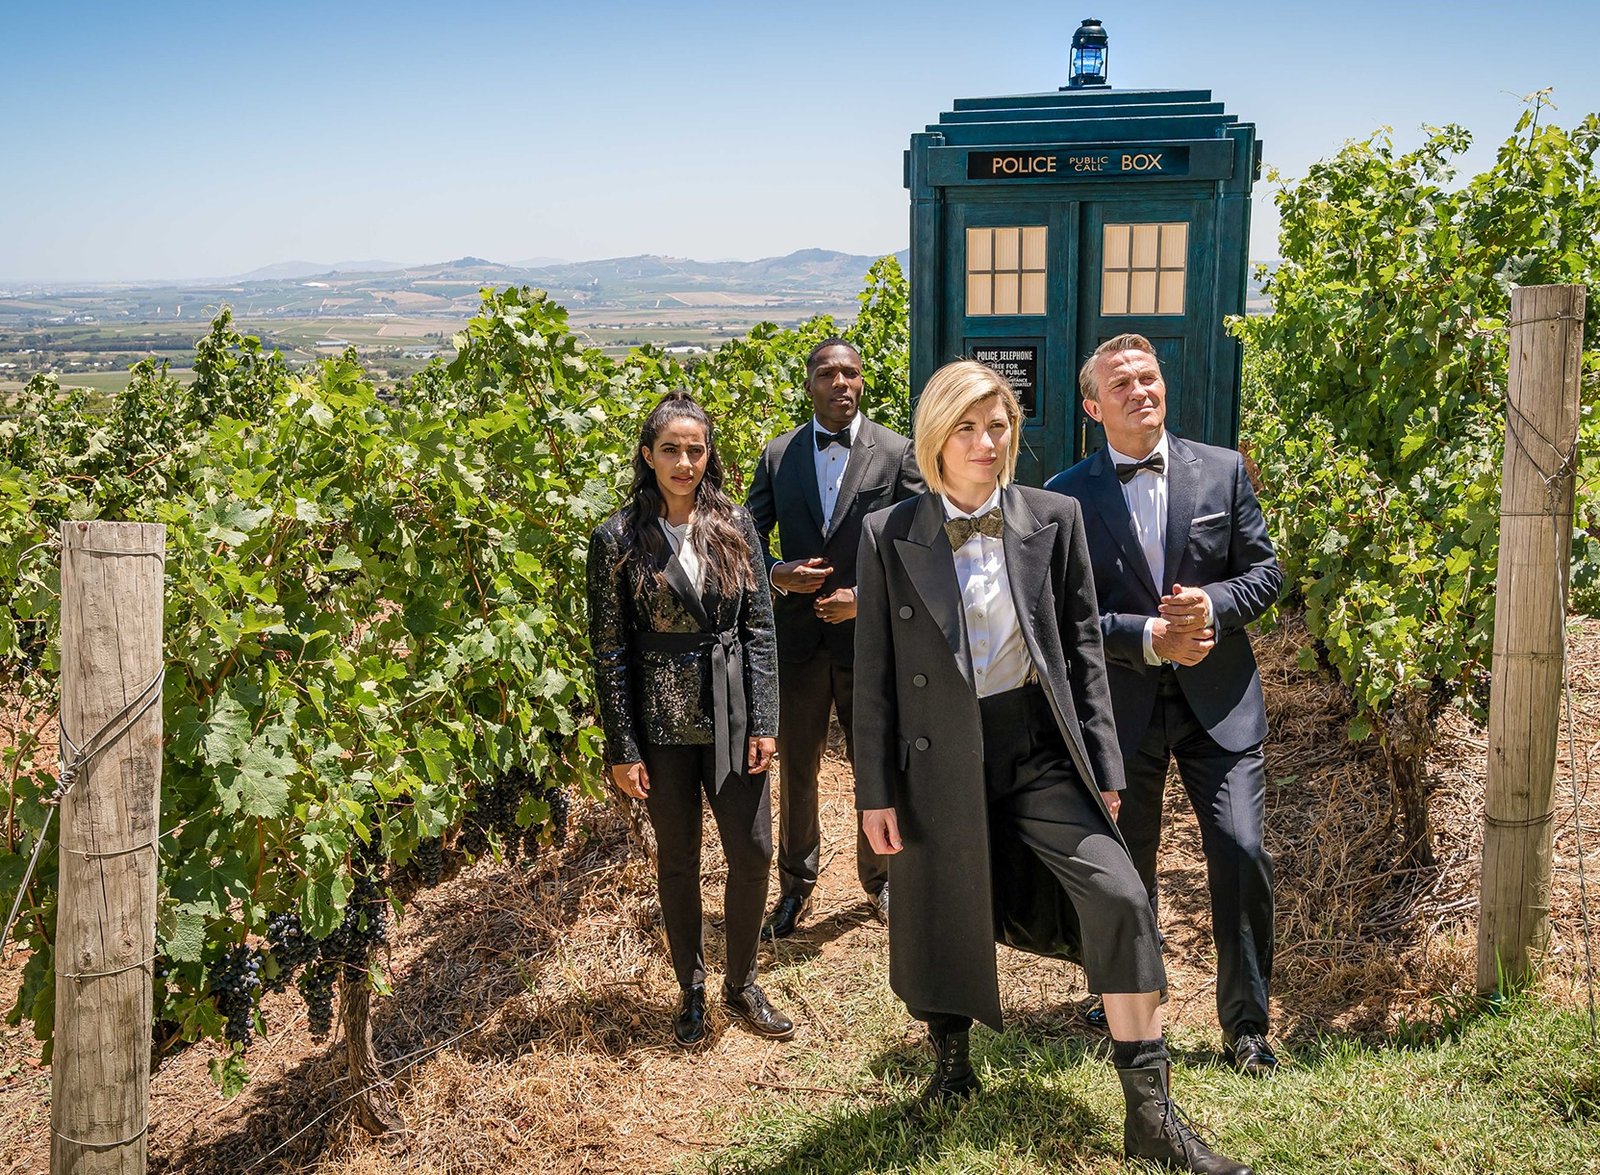 13th Thirteenth Jodie Whittaker Bradley Walsh Mandip Gill Tosin Cole The Doctor Who Companion